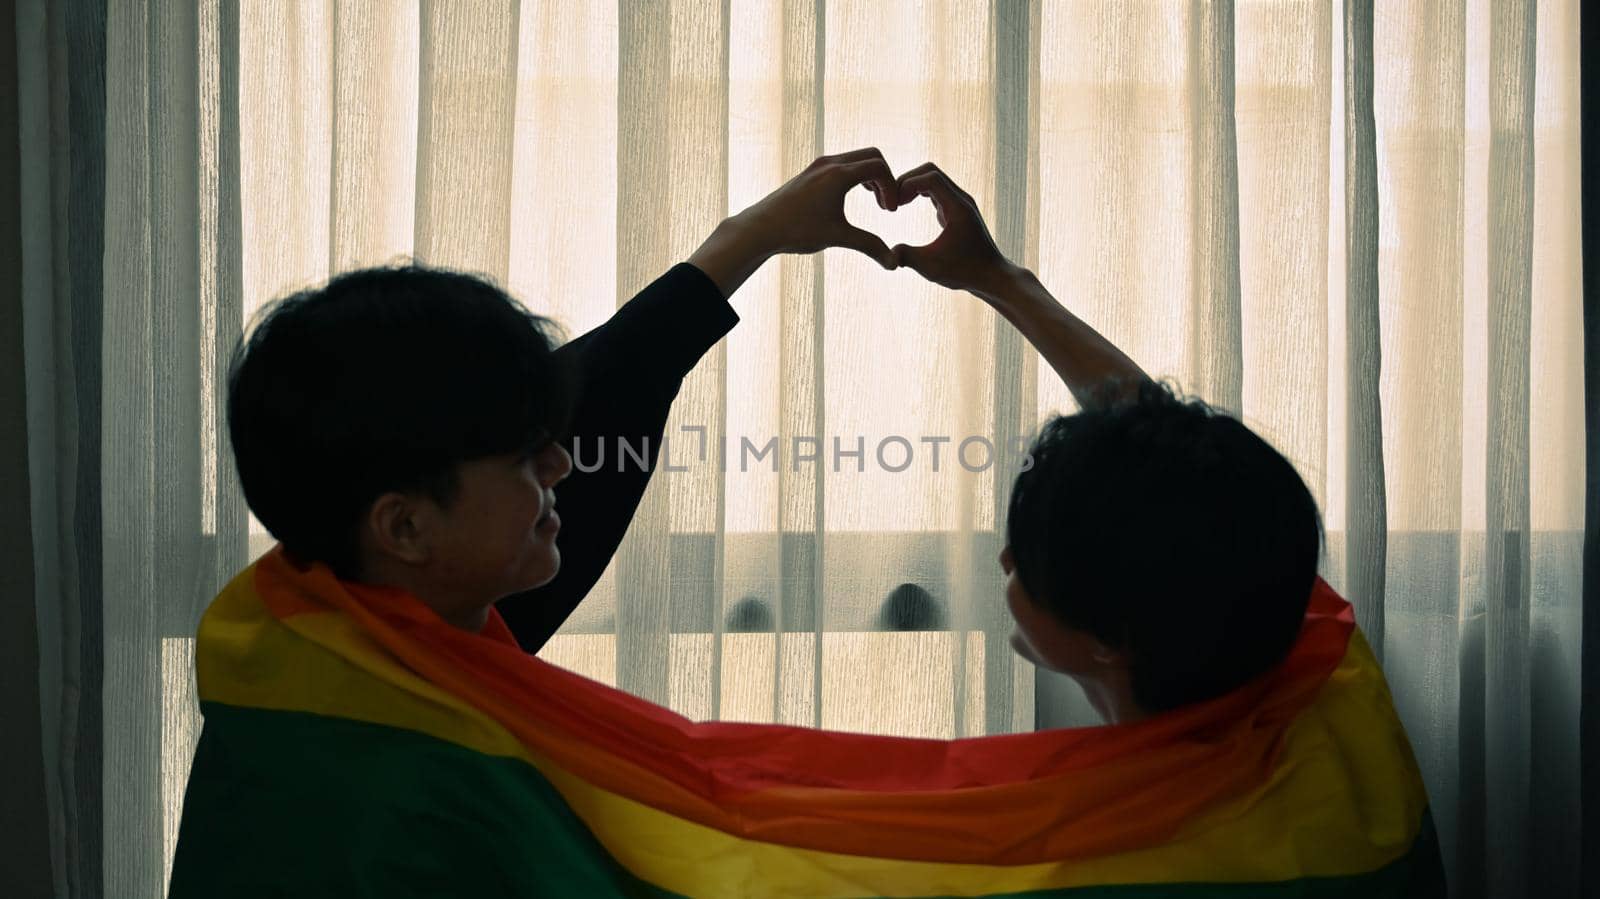 Romantic young gay couple making heart with their hands while sitting under rainbow flag. LGBT, pride, relationships and equality concept.